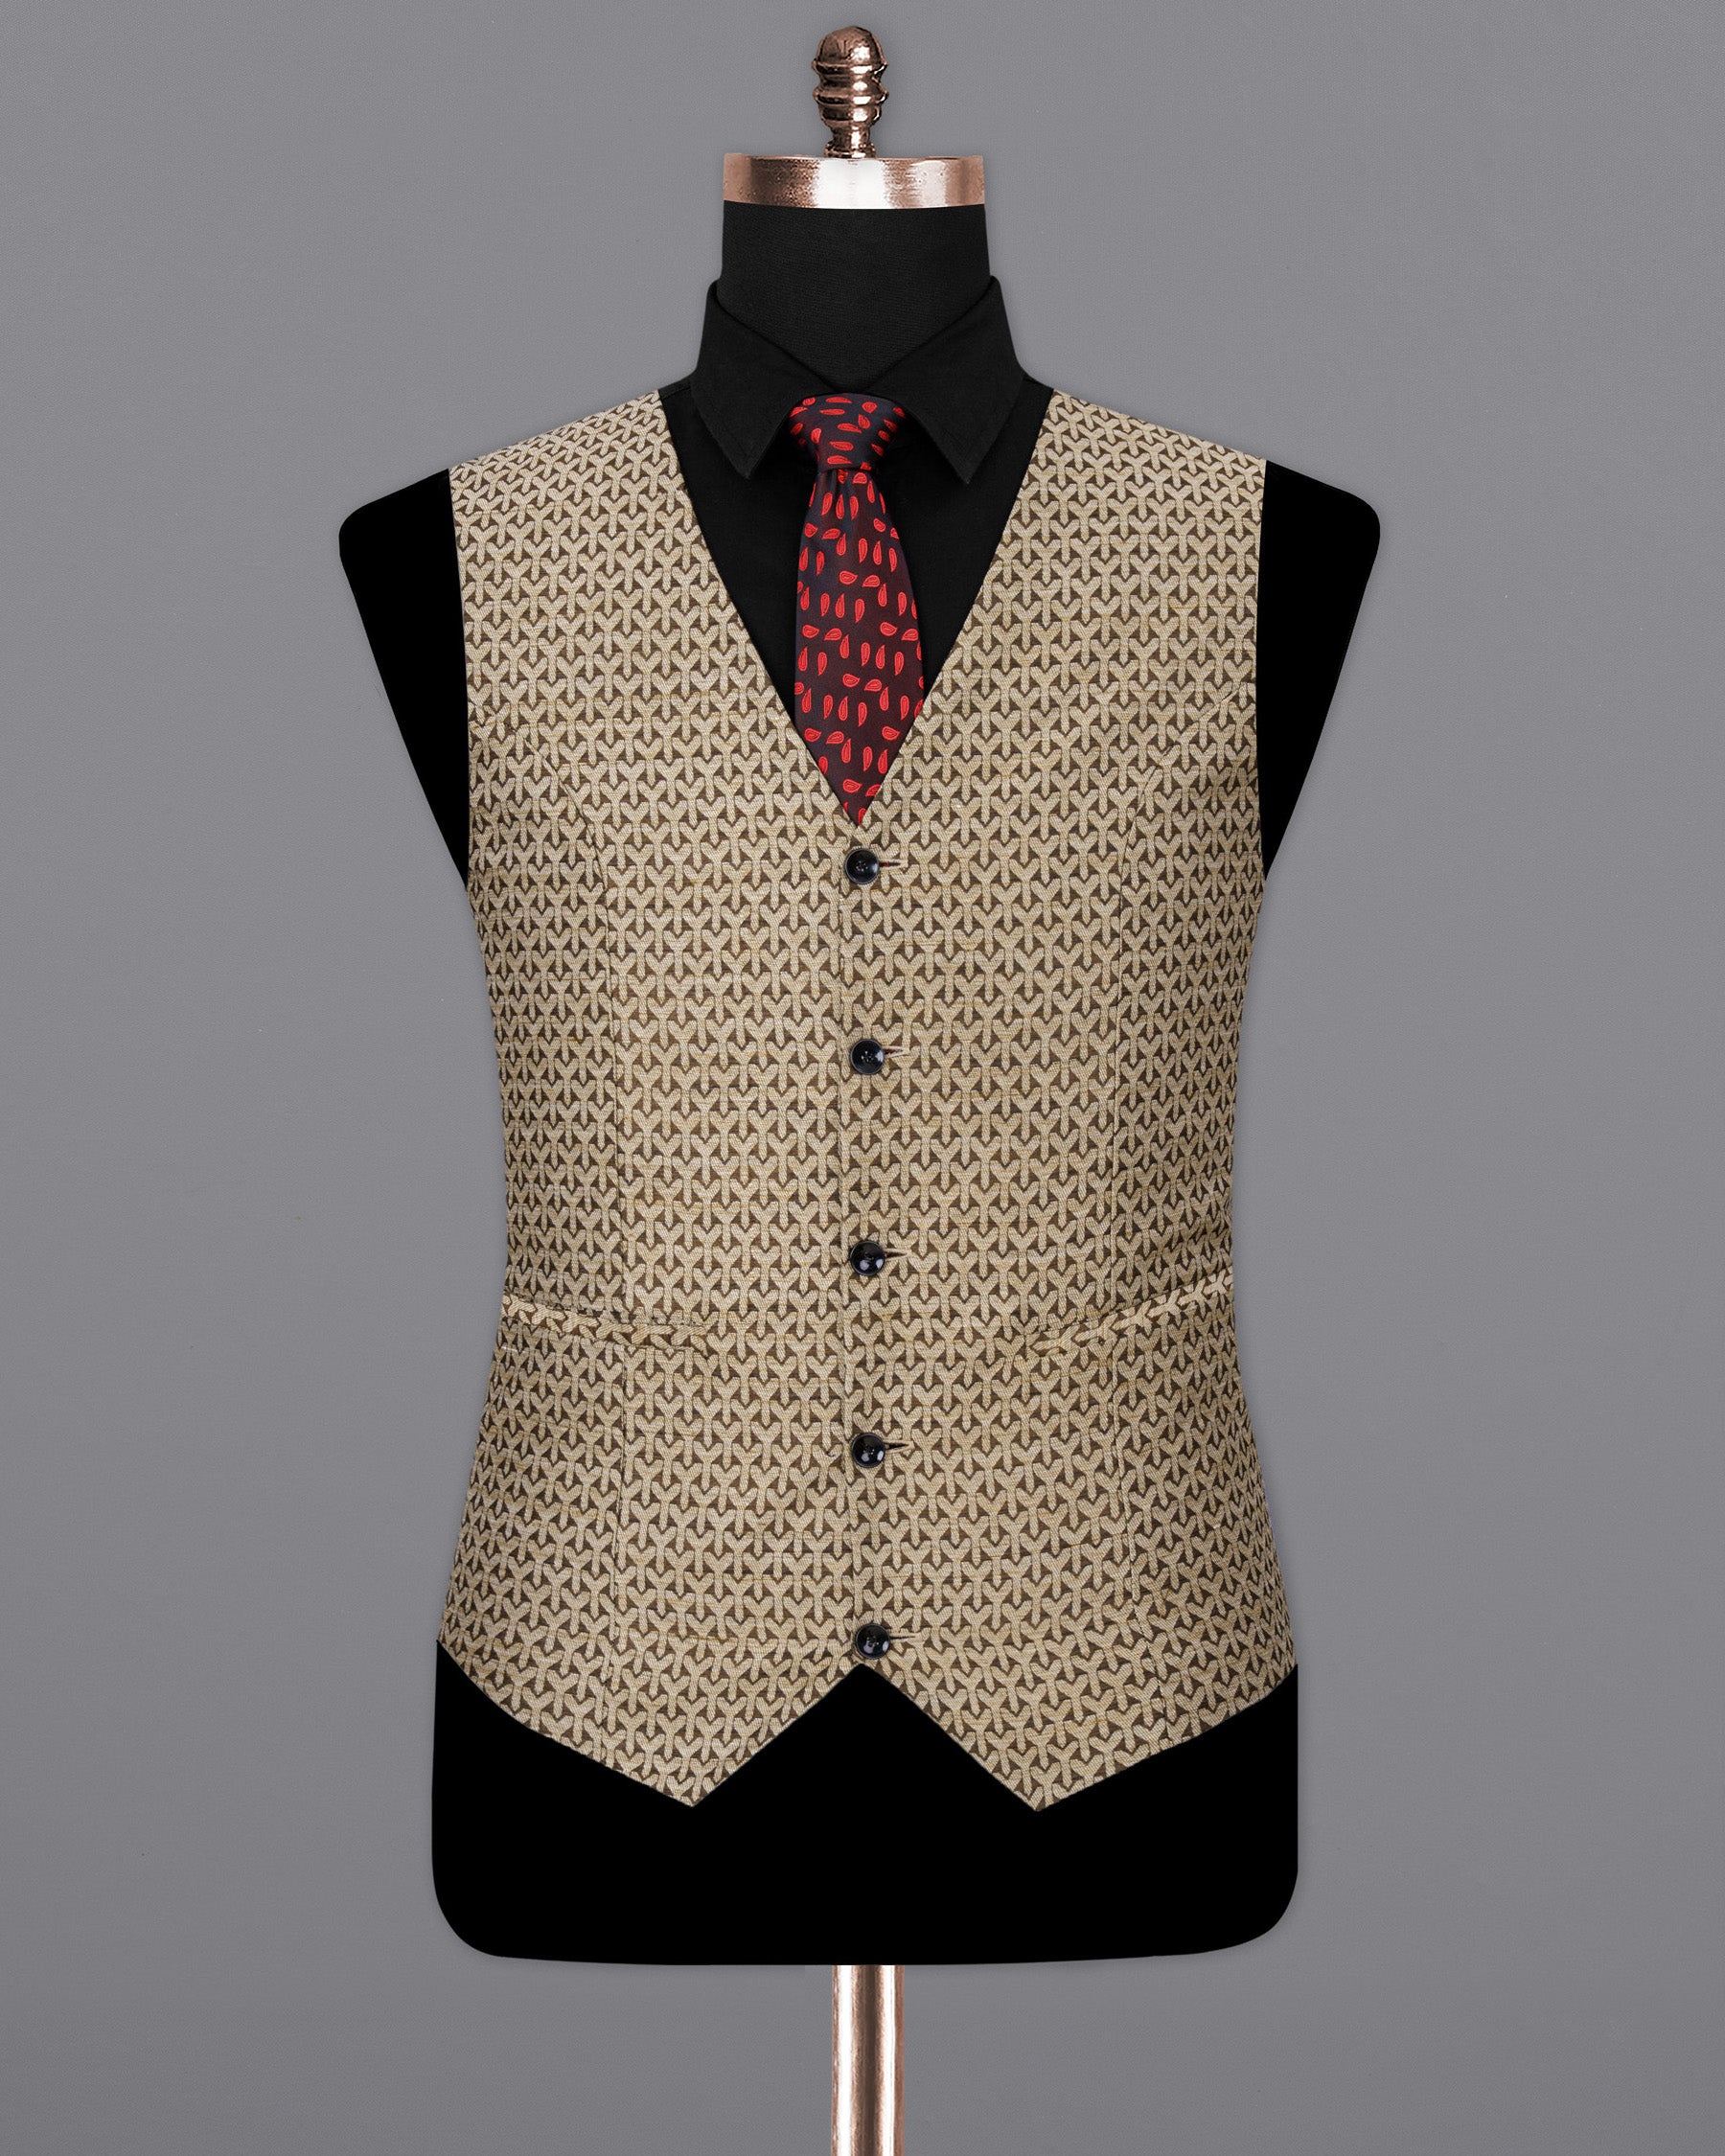 Shingle Fawn Brown and Sapling Beige Textured Waistcoat V1675-36, V1675-38, V1675-40, V1675-42, V1675-44, V1675-46, V1675-48, V1675-50, V1675-52, V1675-54, V1675-56, V1675-58, V1675-60